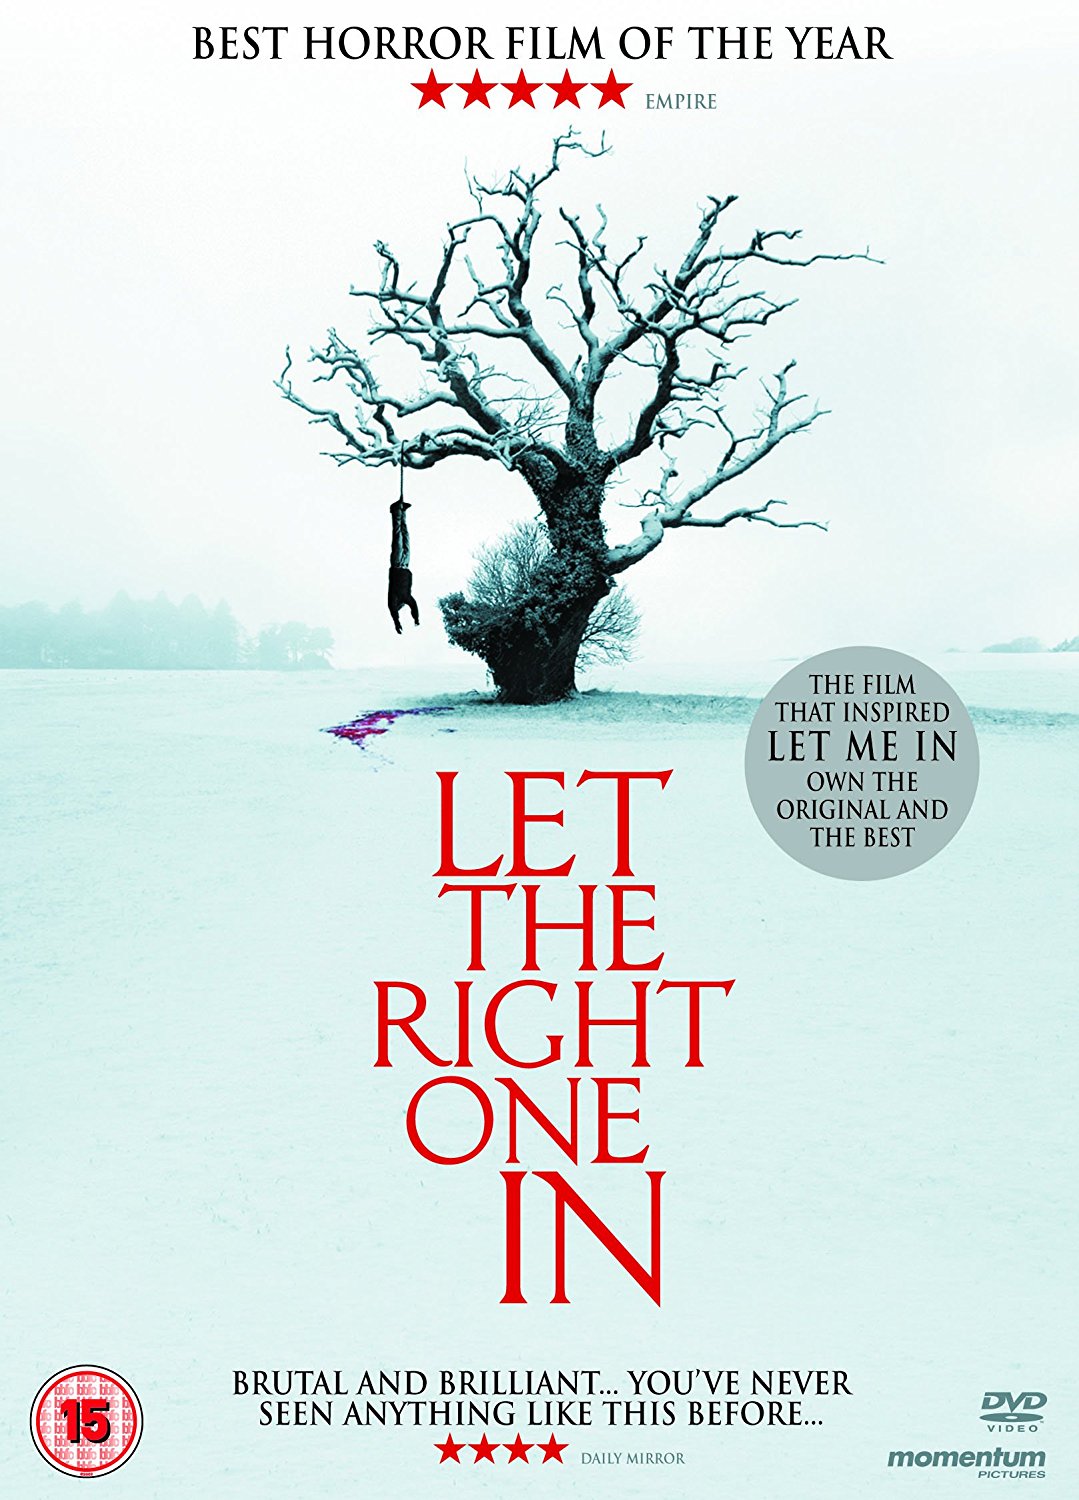 Let The Right One In / Lat den ratte komma in | Tomas Alfredson